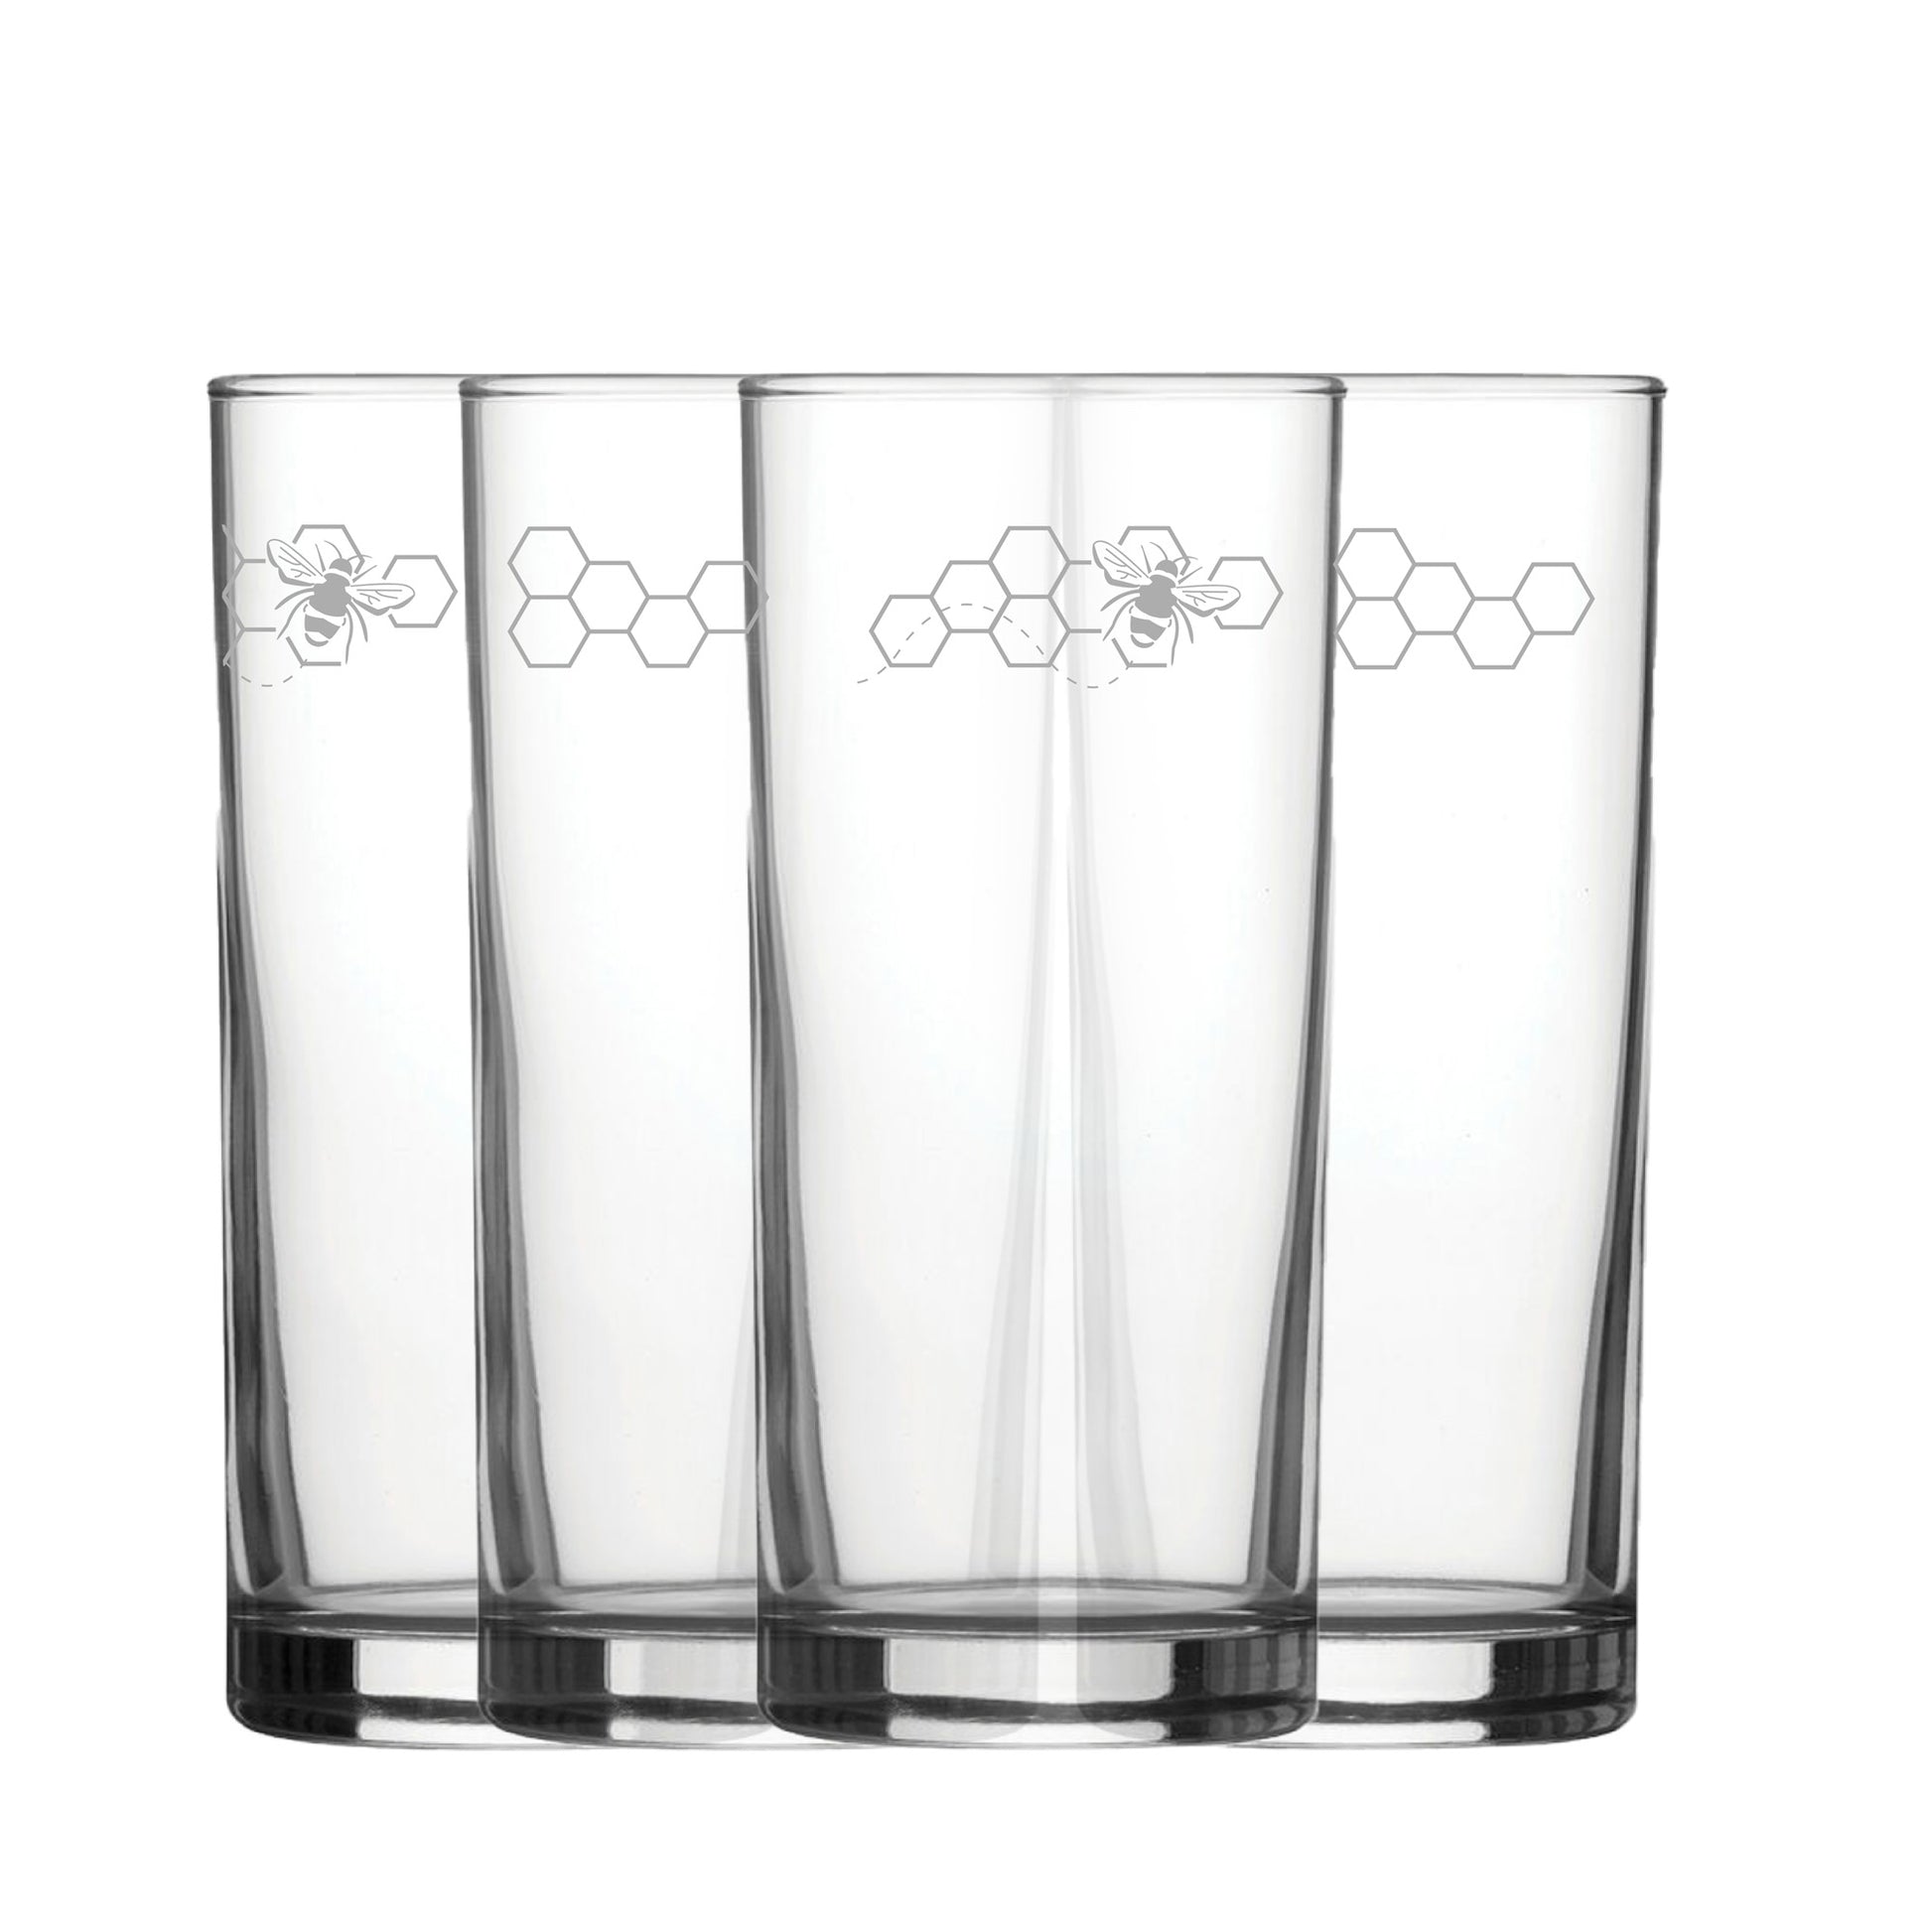 Engraved Bees Set of 4 Patterned Hiball 12oz Glasses Image 2